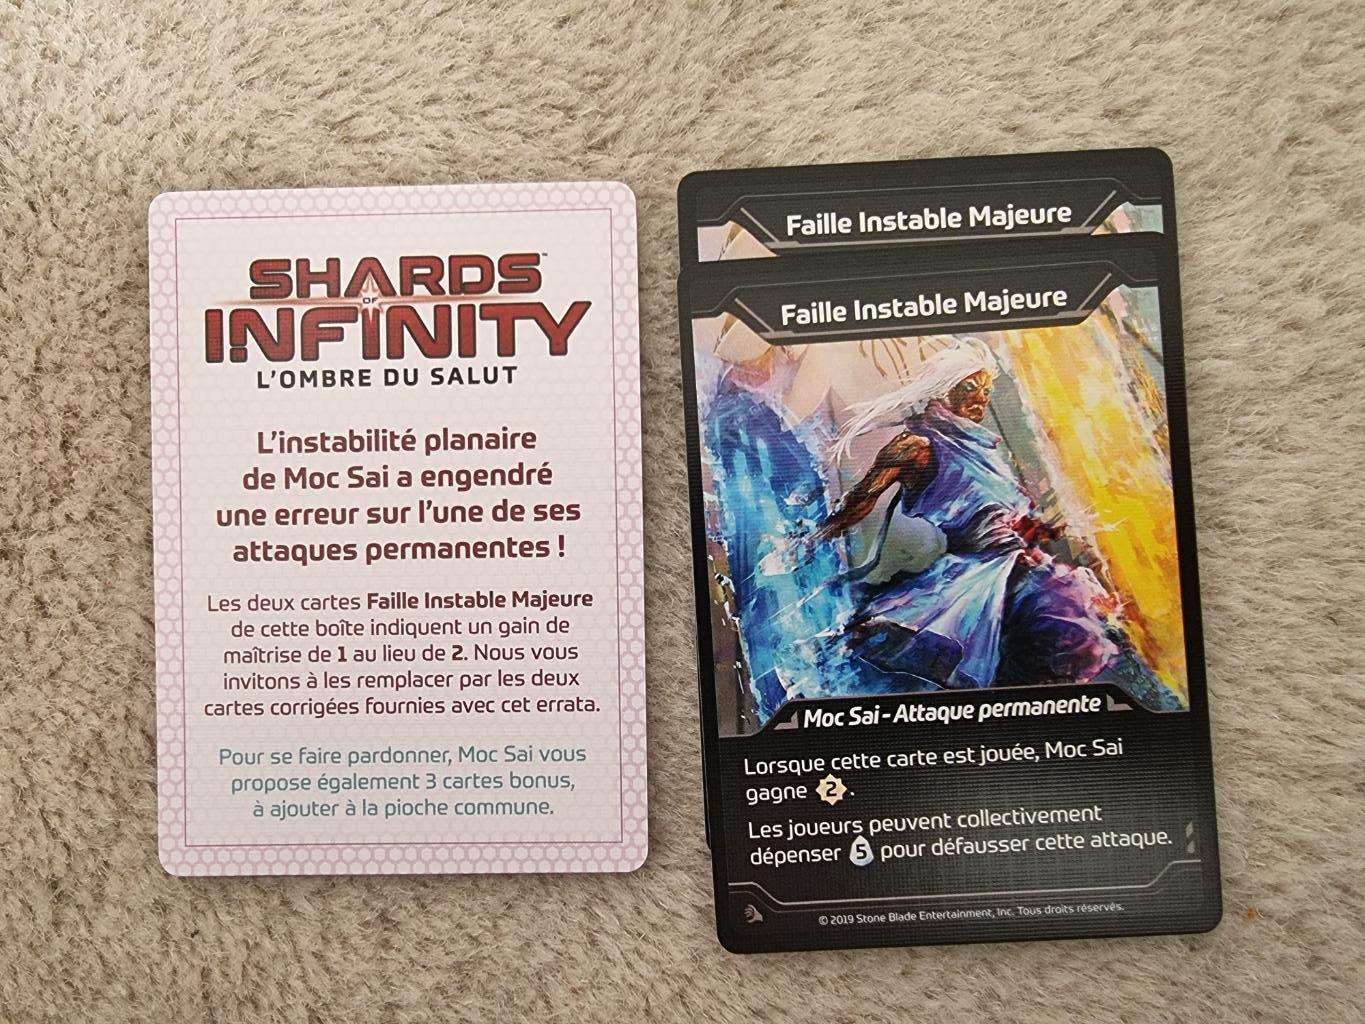 Shards Of Infinity - Faille Instable Majeure